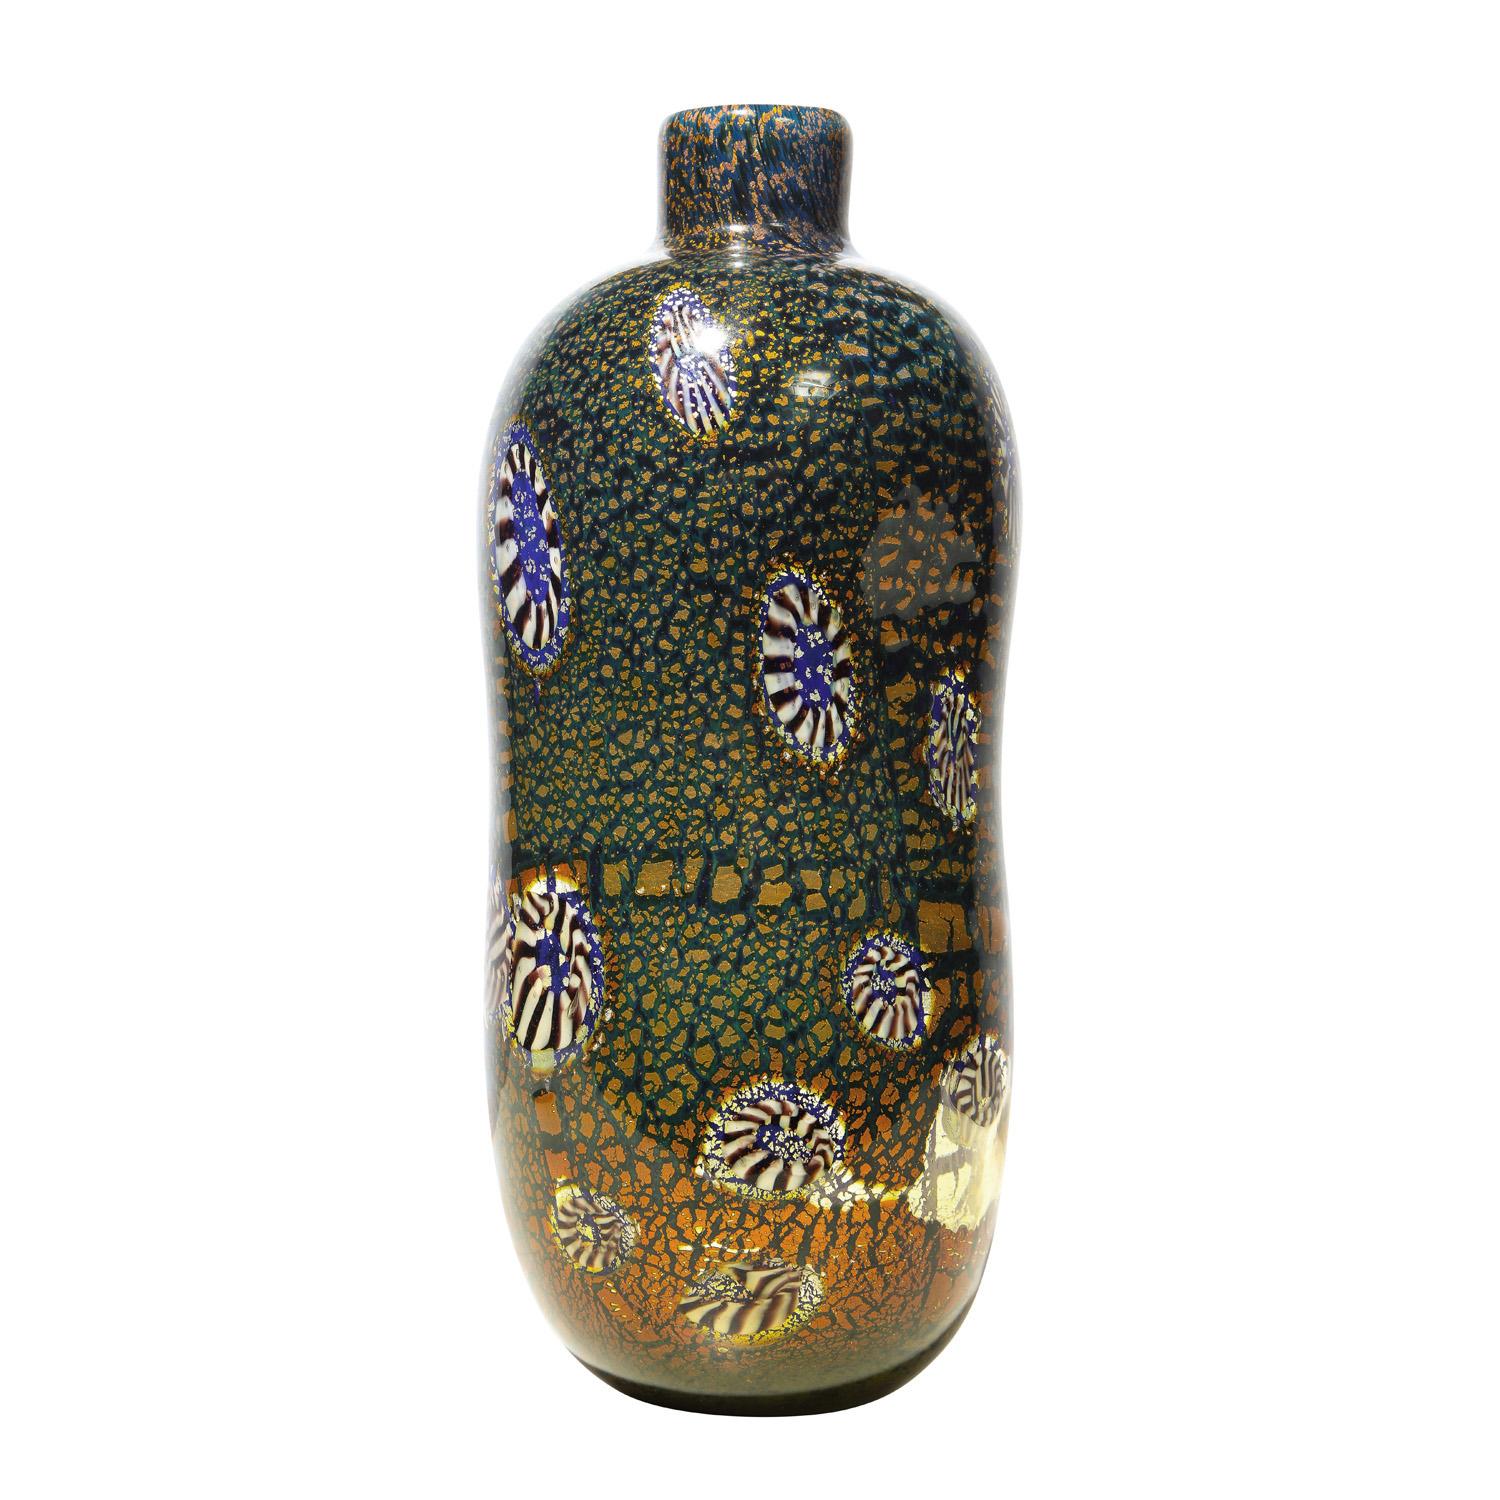 Hand-blown glass vase with undulating form from the Yokohama Series, blue glass with murrhines and gold foil, by Aldo Nason for Arte Vetraria Muranese (A.V.E.M.), Murano Italy, 1960's. Nason, who trained with Giulio Radi, took his design techniques